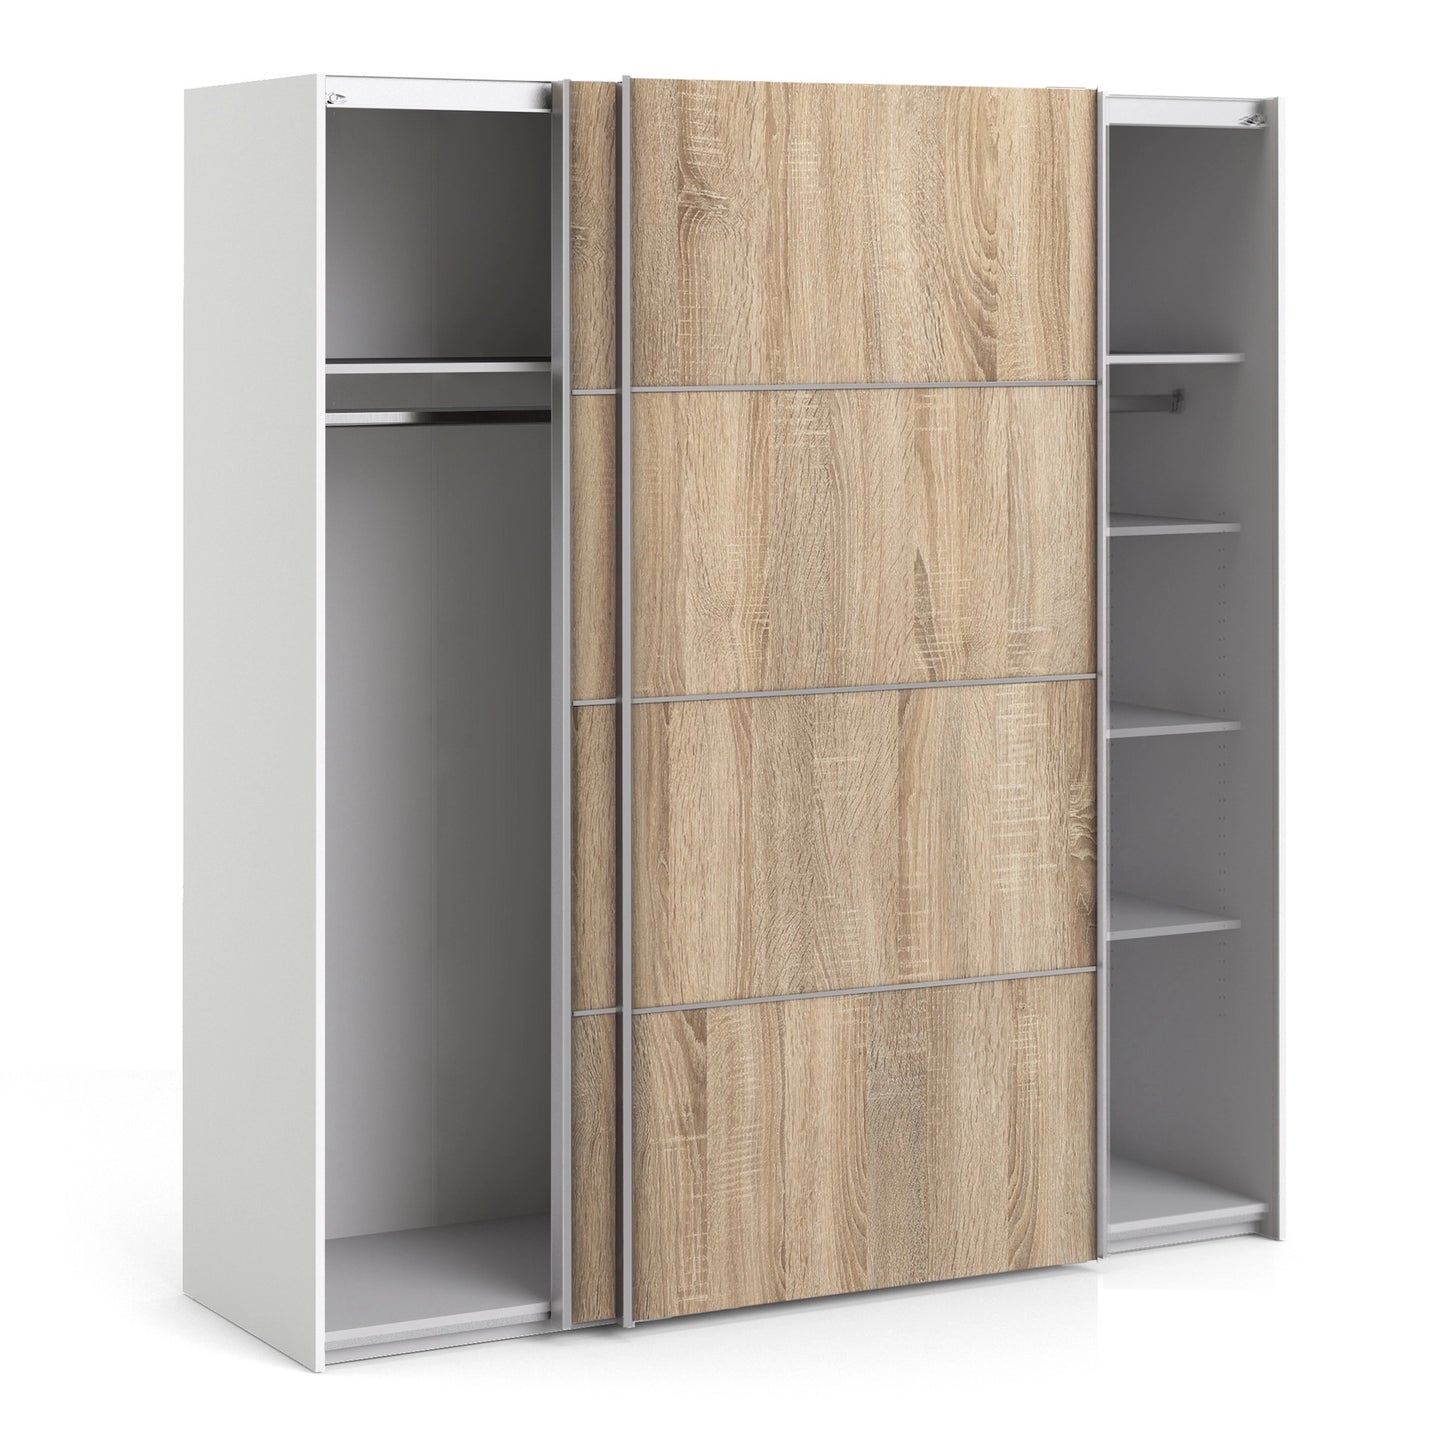 Furniture To Go Verona Sliding Wardrobe 180cm in White with Oak Doors with 5 Shelves